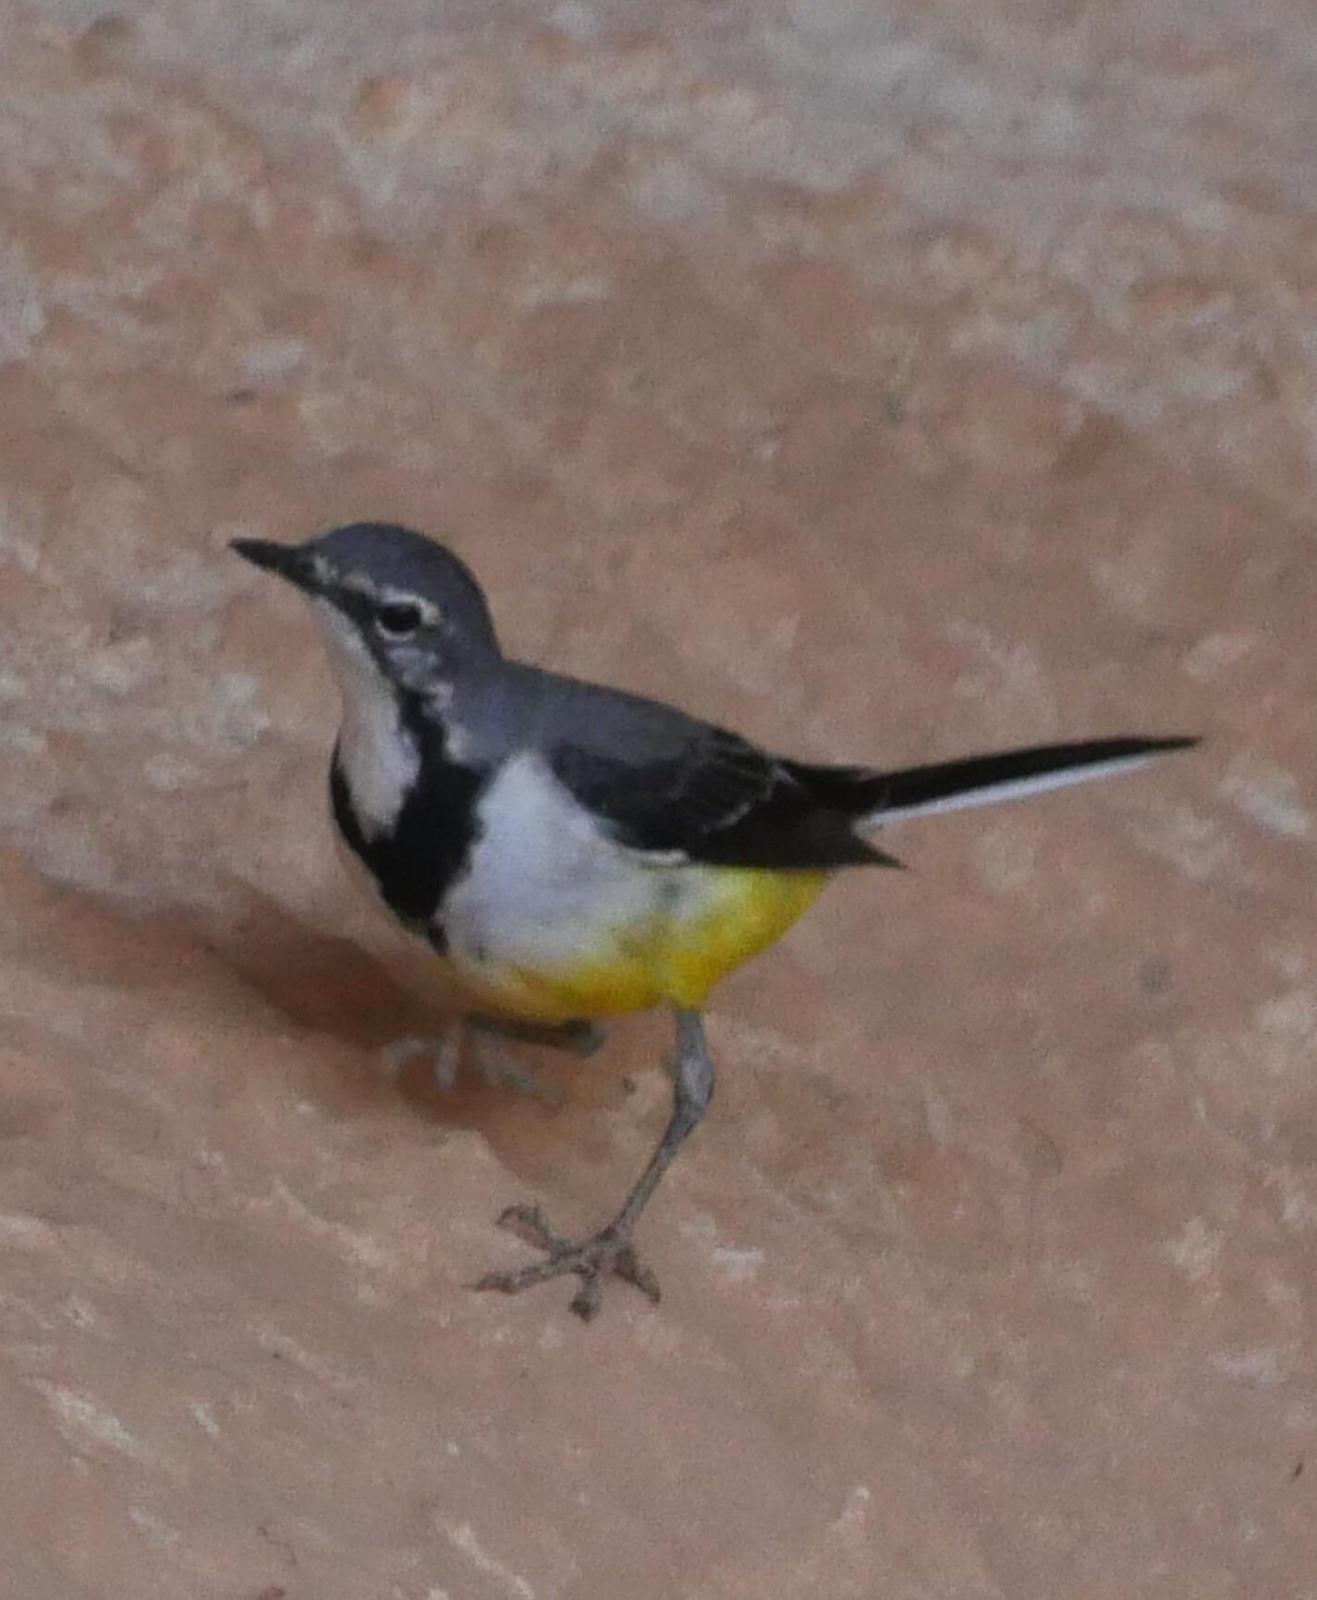 Madagascar Wagtail Photo by Peter Lowe